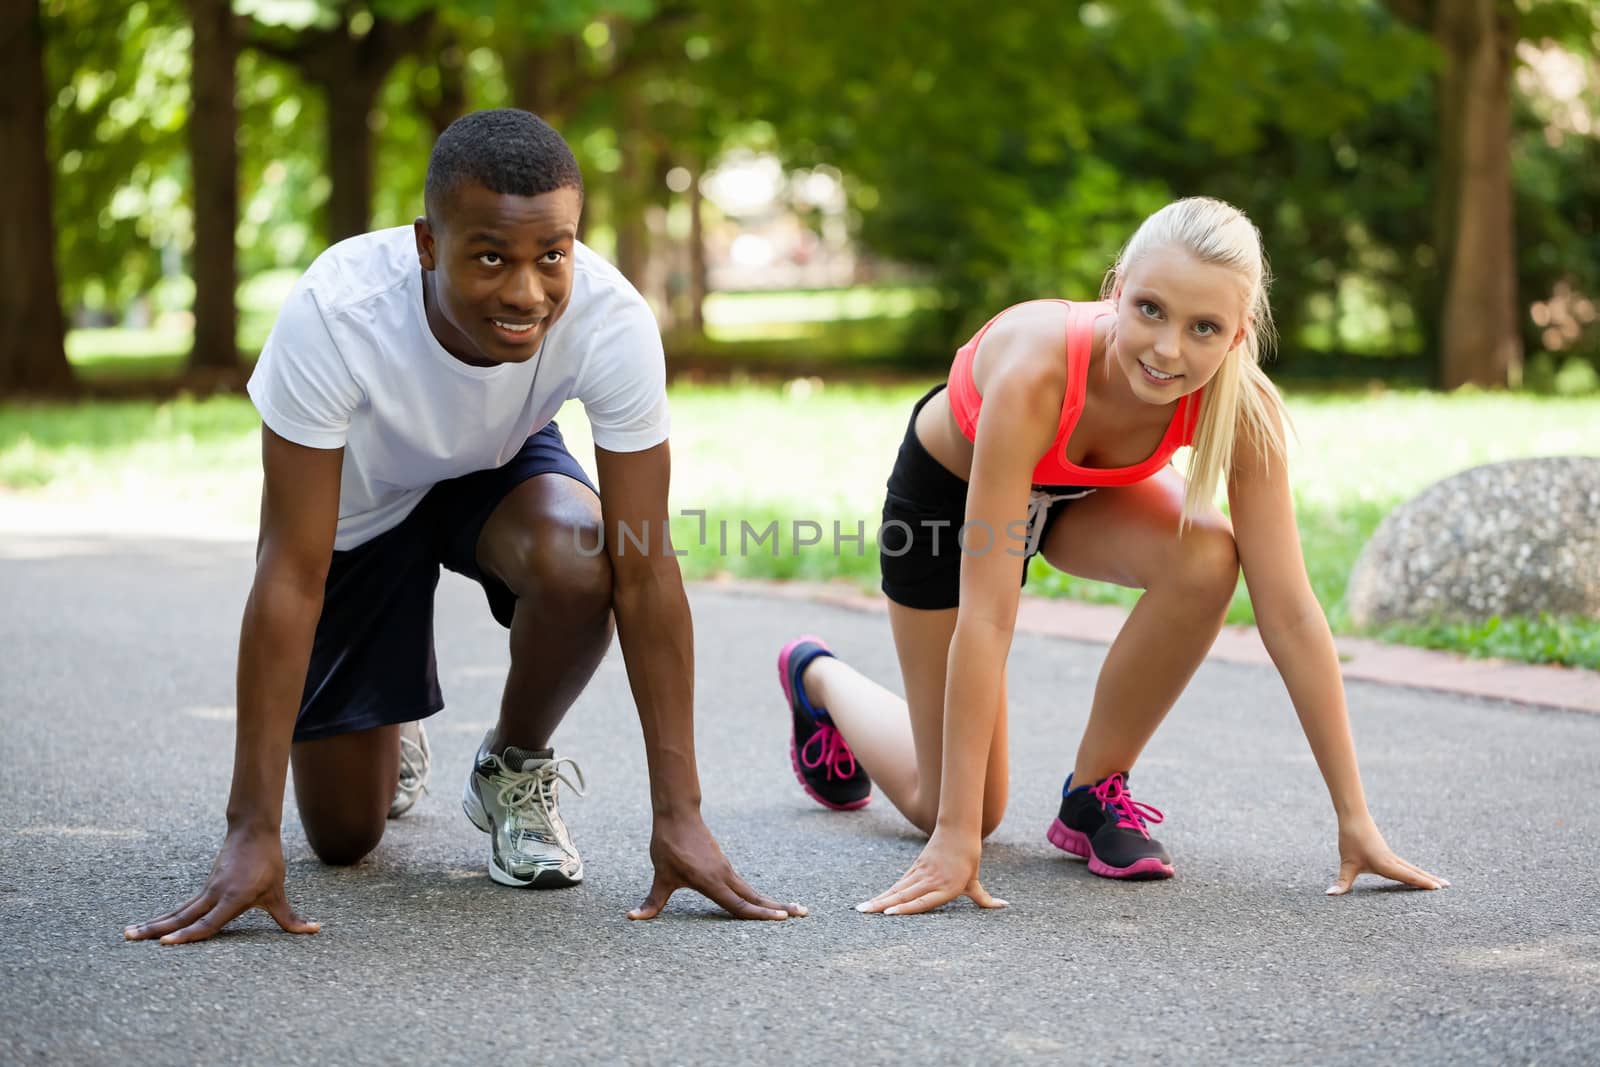 young couple runner jogger in park outdoor summer sport lifestyle 